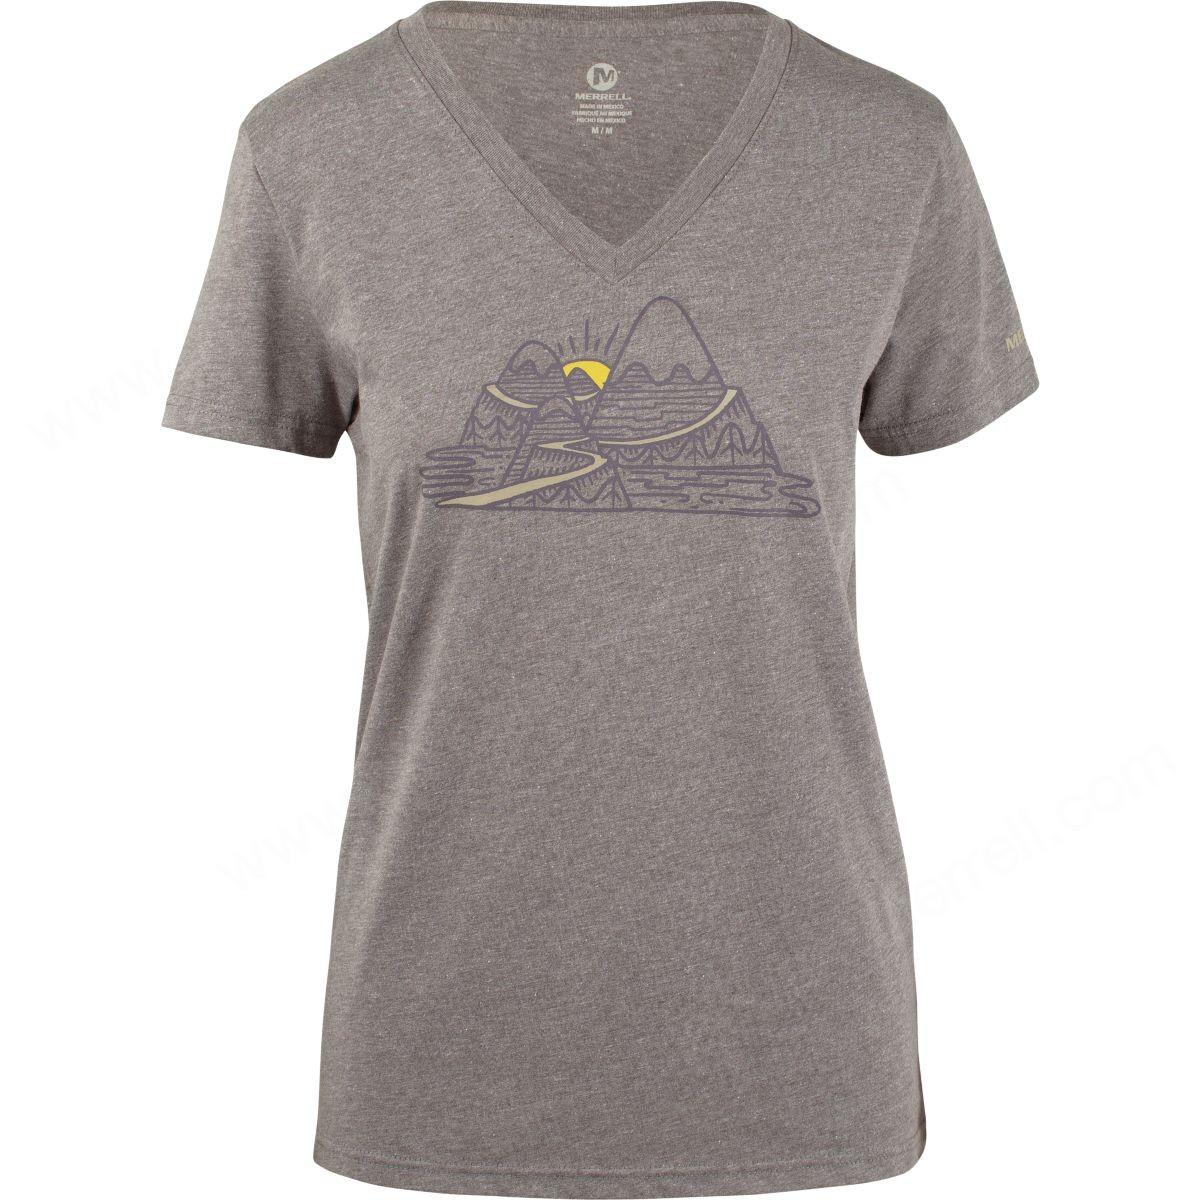 Merrell Lady's Rolling Hills Graphic Tshirts Heather Grey - -0